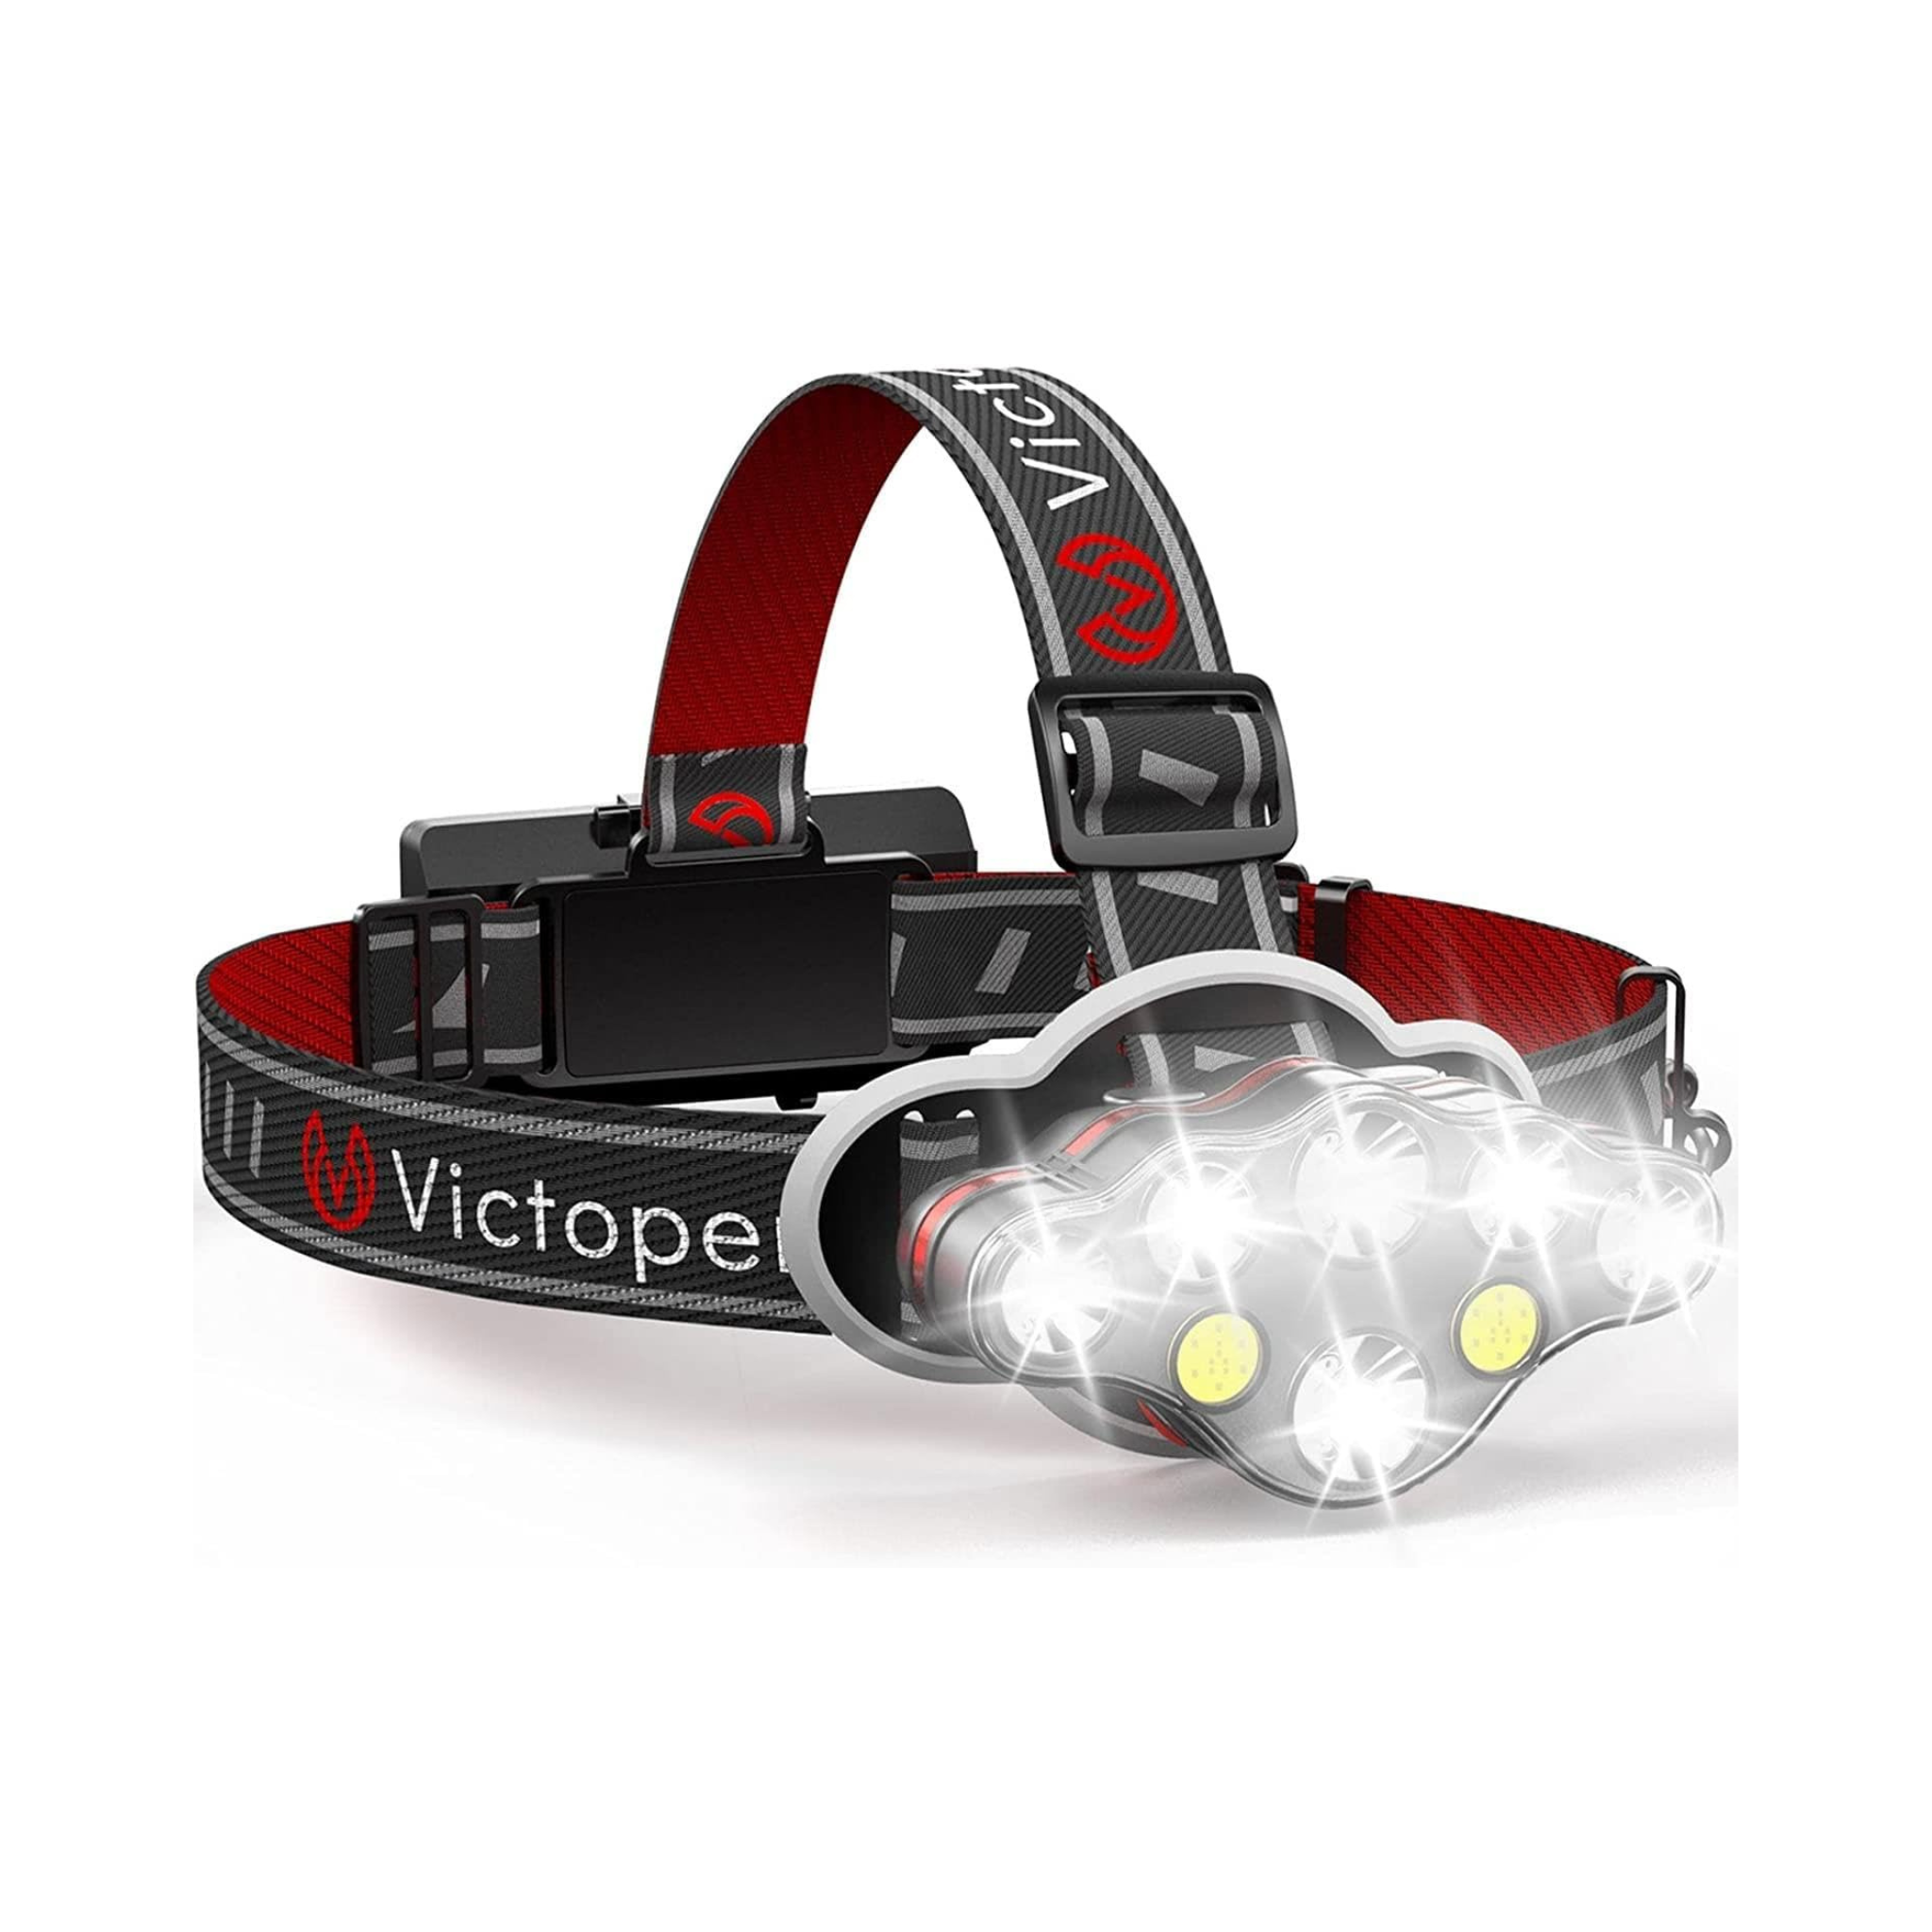 Victoper 8 LED 18000 High Lumen Rechargeable Headlamp with Red Light